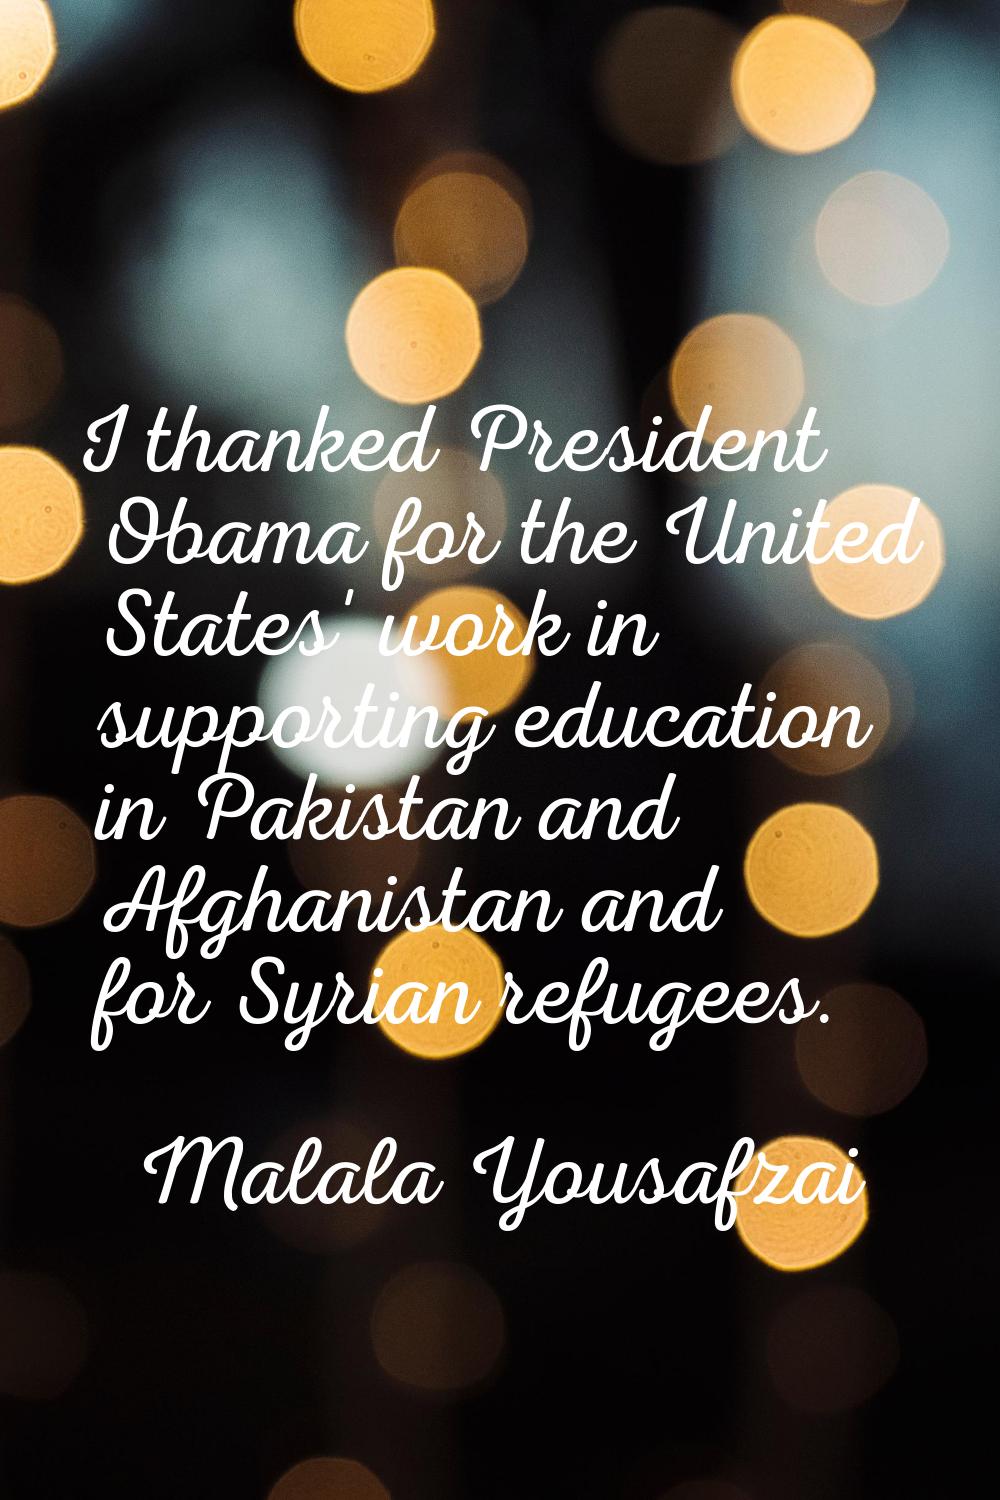 I thanked President Obama for the United States' work in supporting education in Pakistan and Afgha